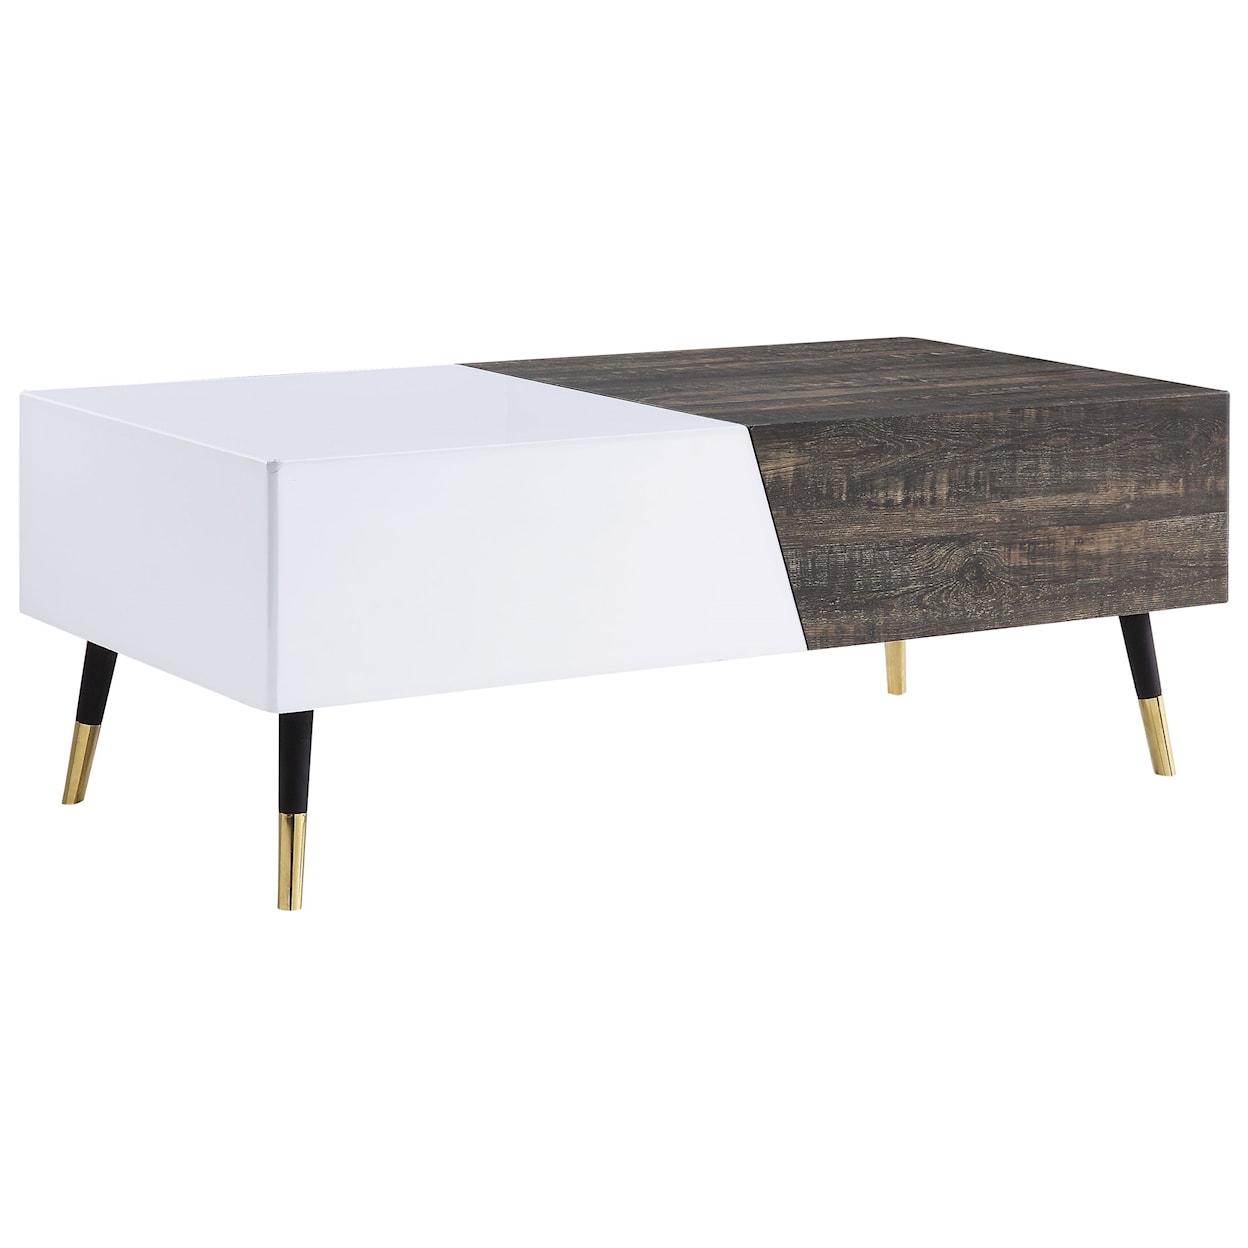 Acme Furniture Orion Coffee Table